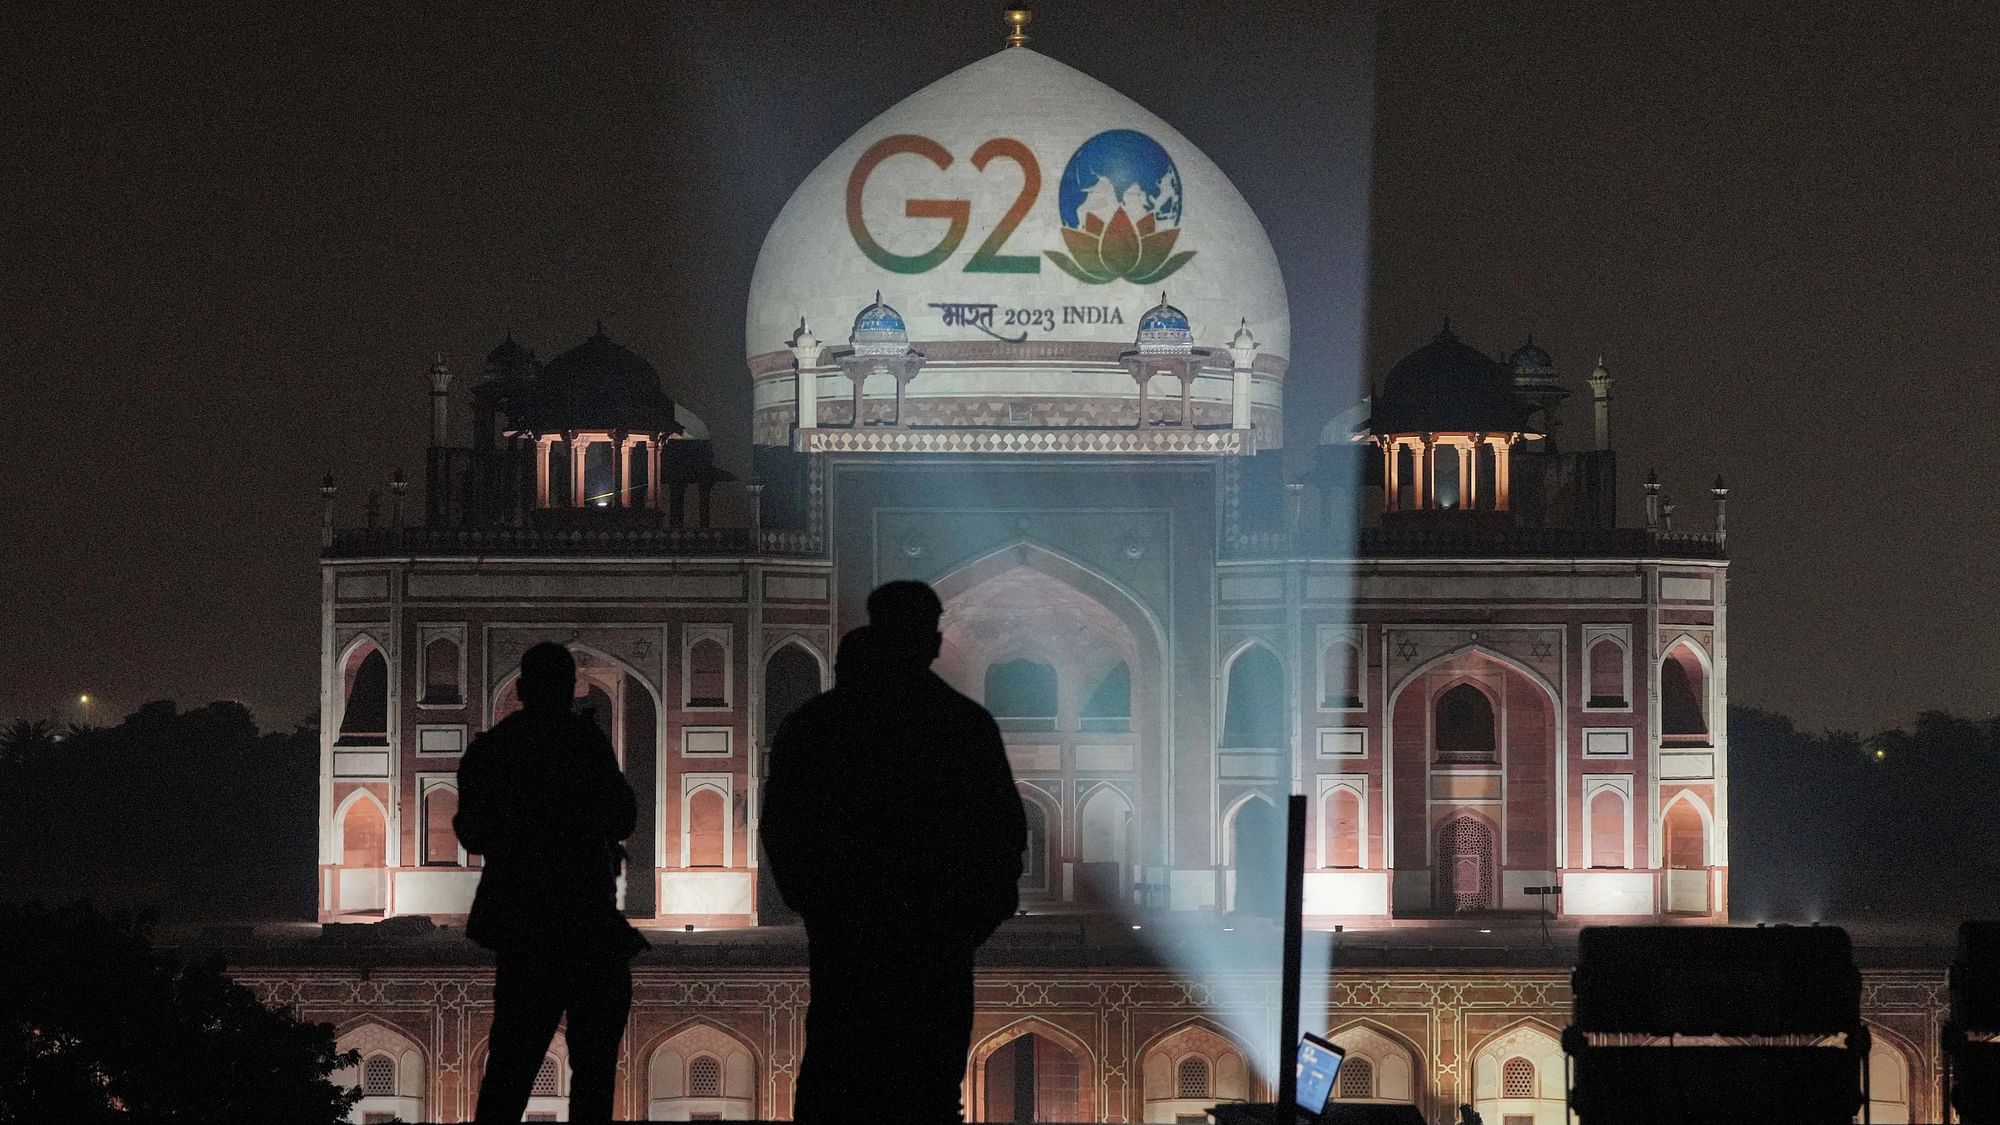 <div class="paragraphs"><p>The Safdarjung Tomb is illuminated displaying the logo of G20 Summit 2023, to be held in India, in New Delhi.</p></div>